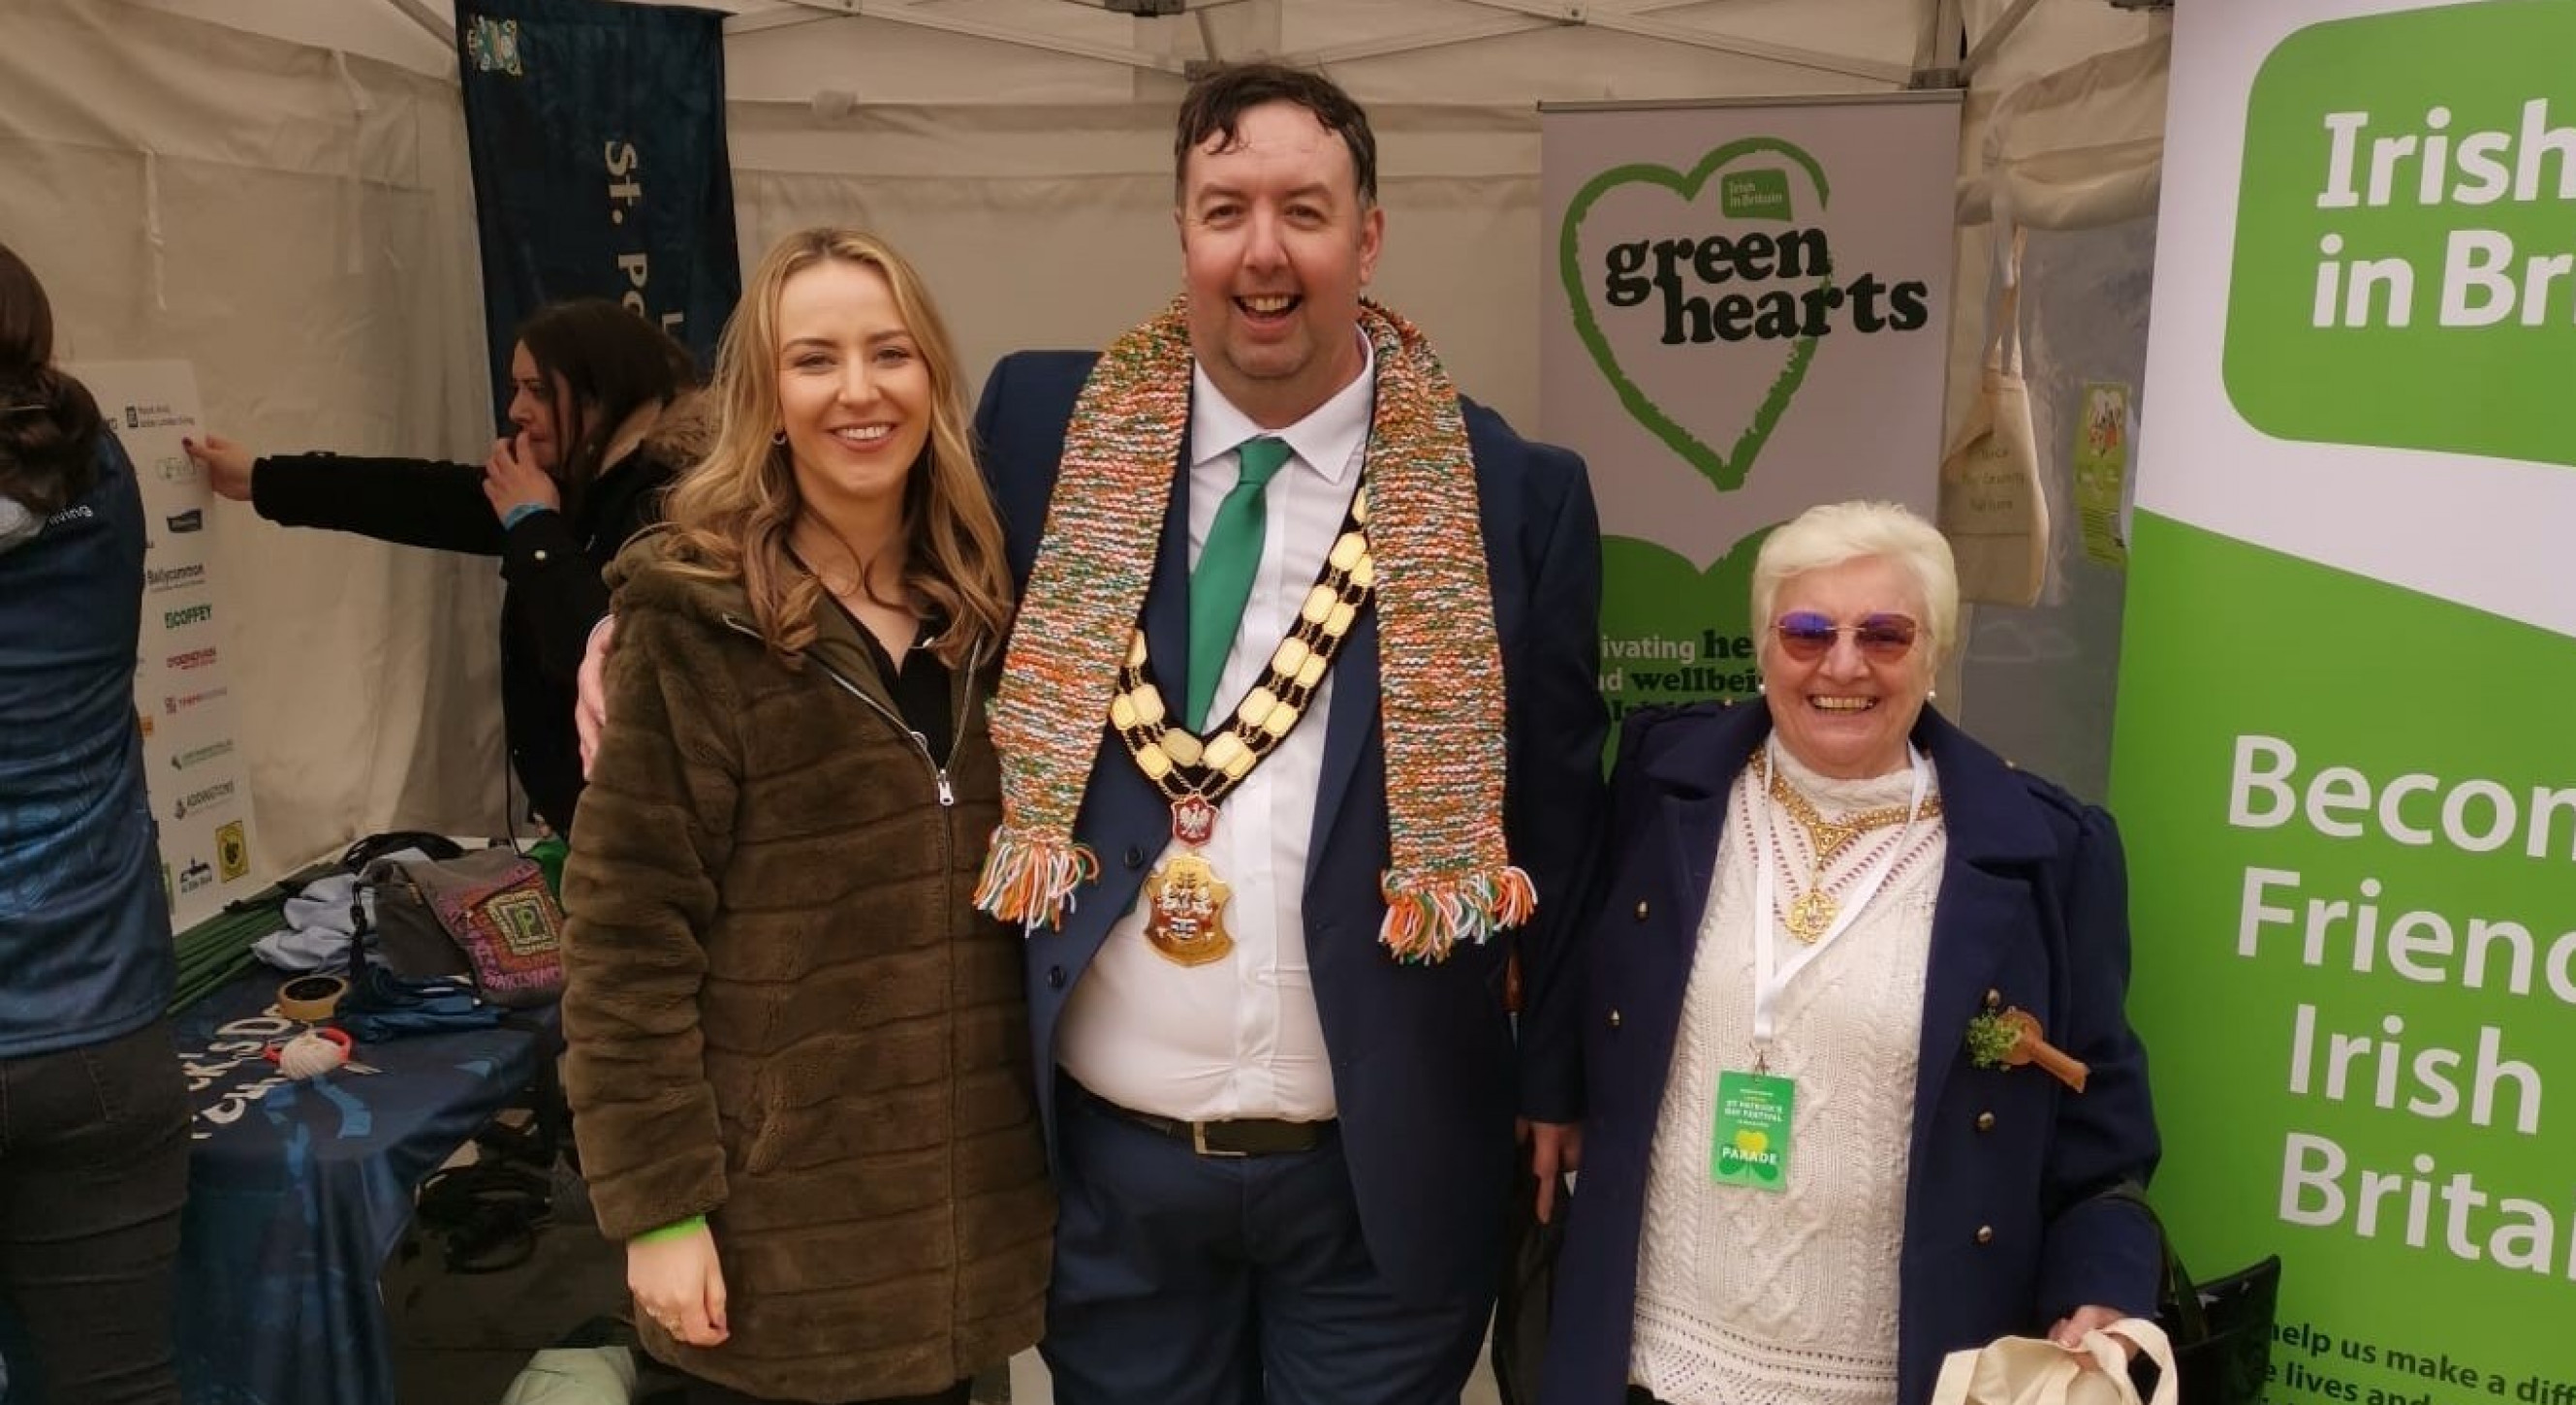 The Irish-born Mayor of Islington, Troy Gallagher, visited the Irish in Britain stand.